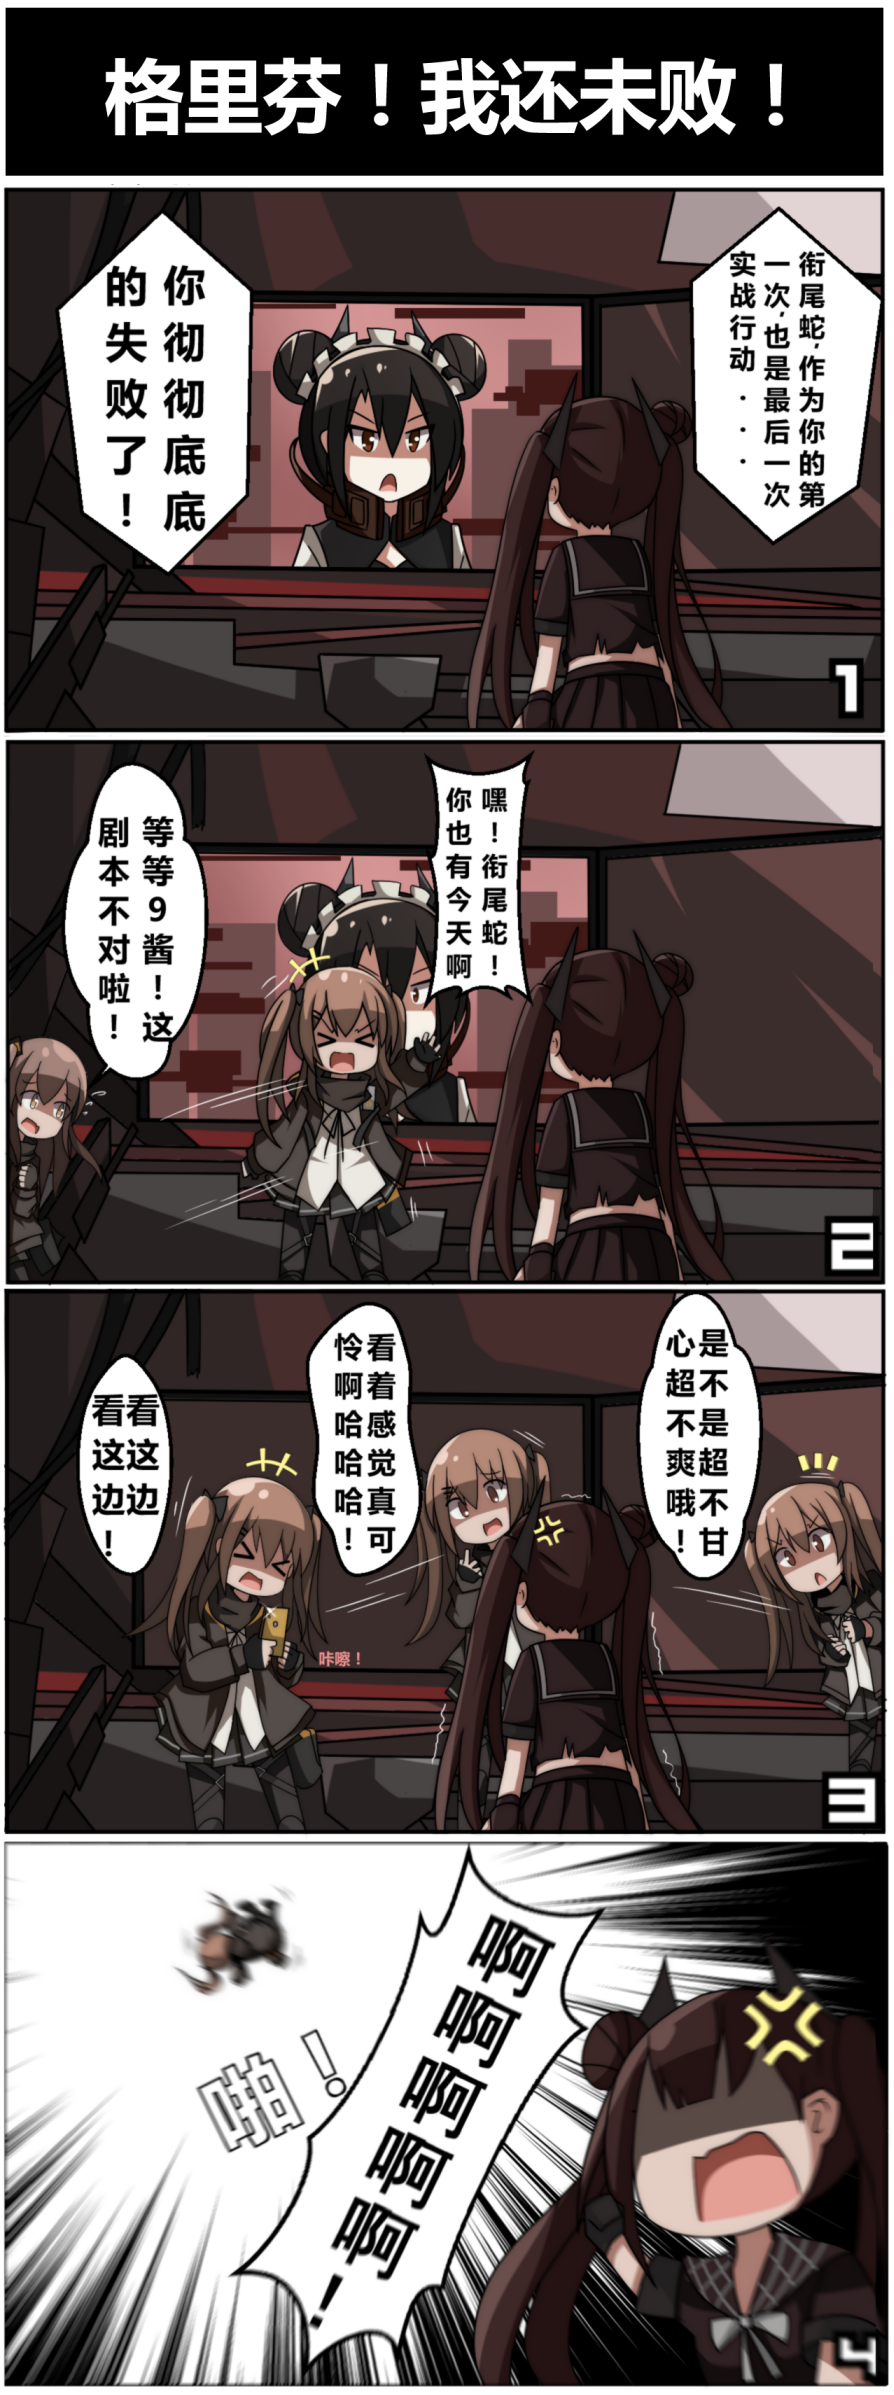 &gt;_&lt; 4girls 4koma ac130 agent_(girls_frontline) angry black_hair brown_hair cellphone chinese closed_eyes comic commentary commentary_request girls_frontline hair_ornament hairclip highres jacket maid_headdress multiple_girls ouroboros_(girls_frontline) pale_skin phone punching red_eyes skirt smartphone translation_request twintails ump45_(girls_frontline) ump9_(girls_frontline)